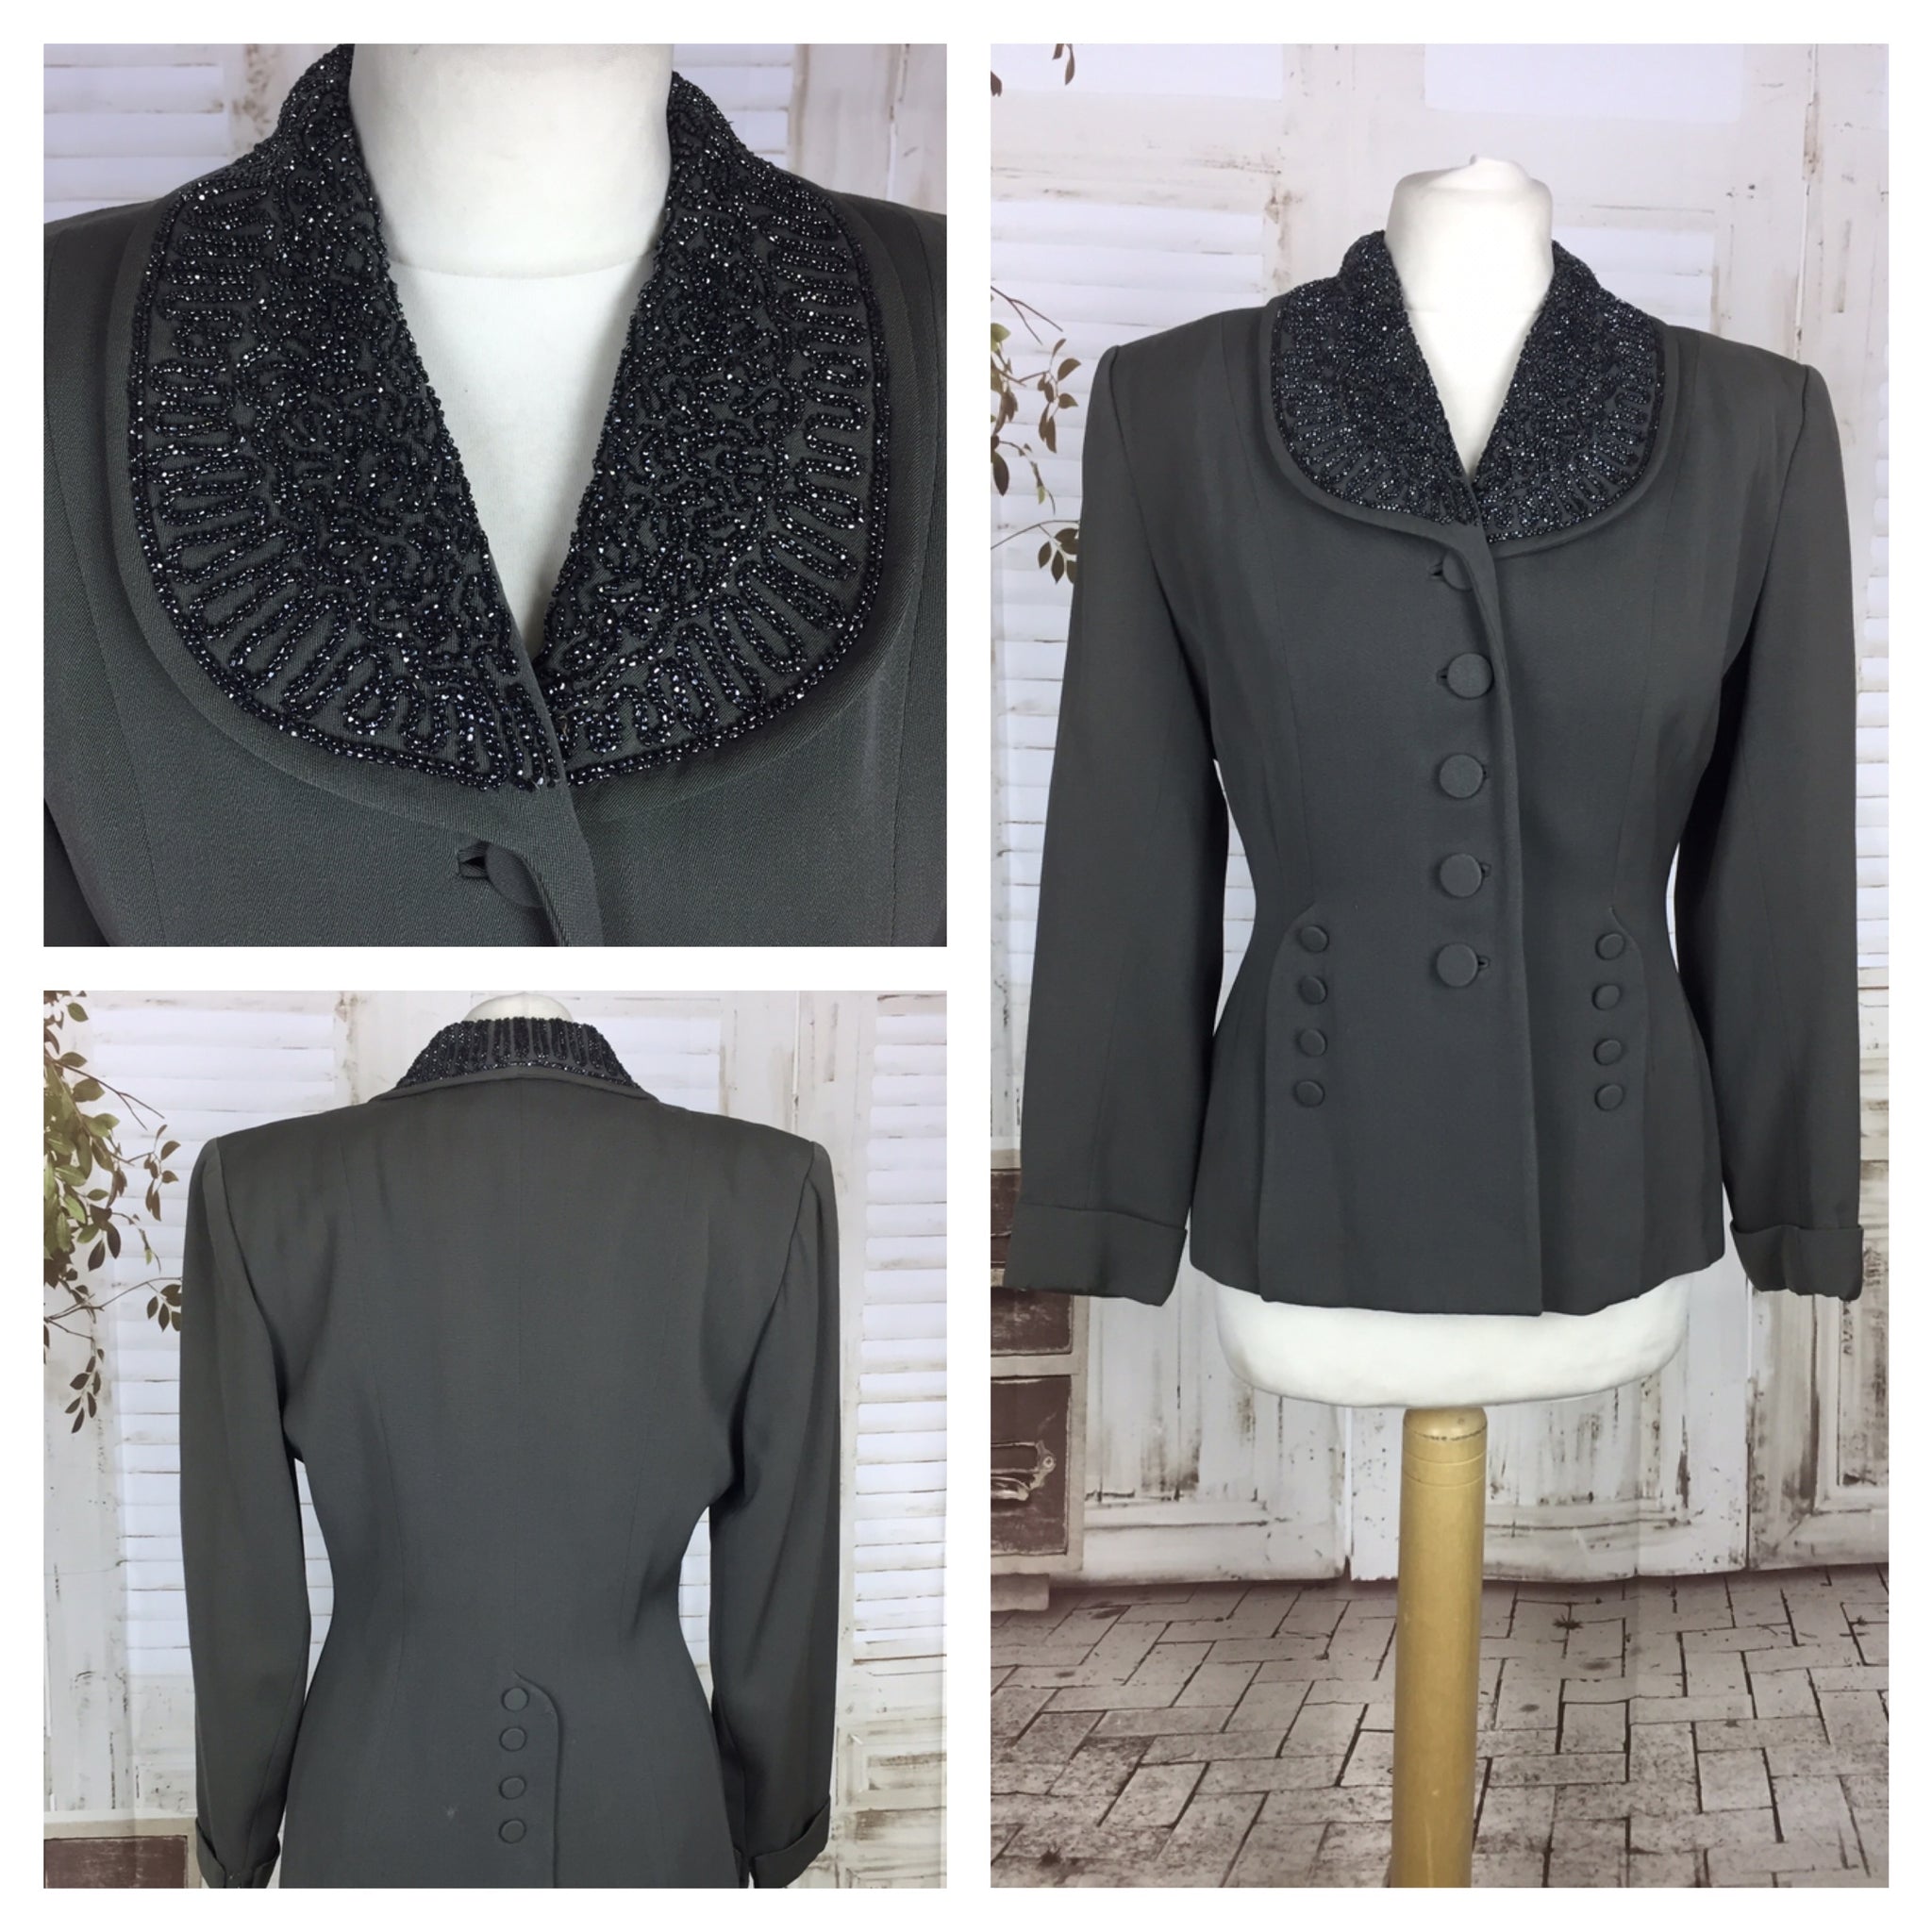 Original 1940s 40s Vintage Grey Gabardine Gab Jacket With Beaded Collar And Decorative Buttons 